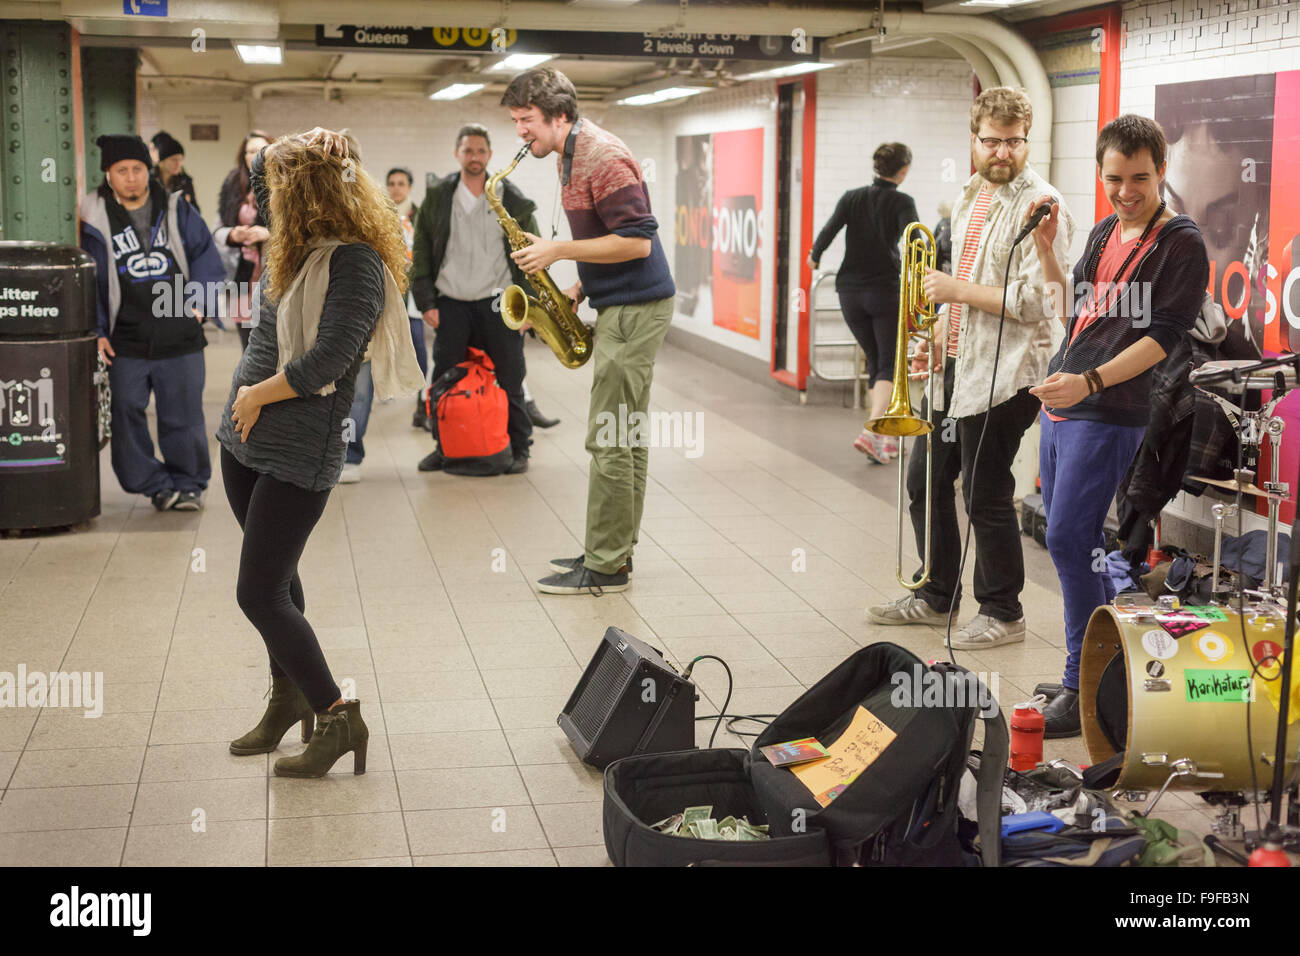 Musicians and dancer performing at a subway stop,New York City, USA Stock Photo